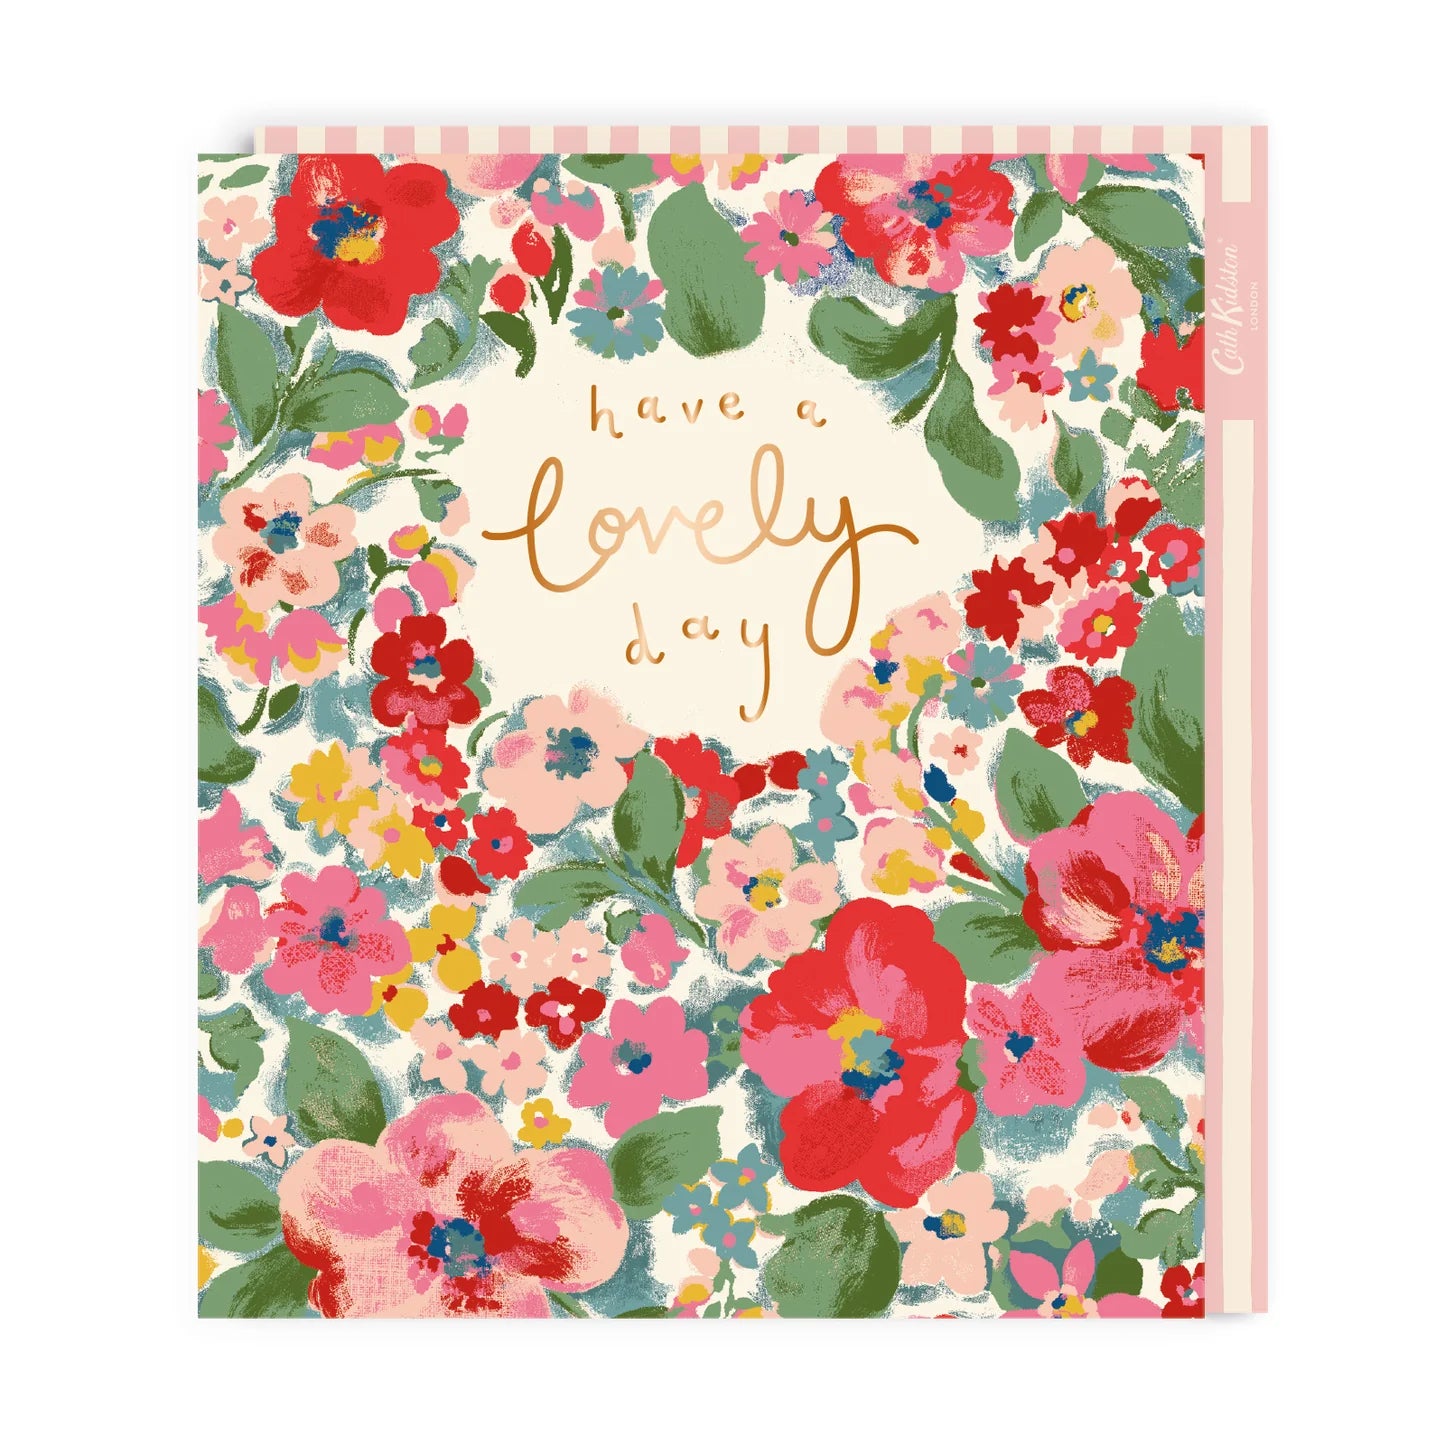 Large Have a lovely day card - The Bristol Artisan Handmade Sustainable Gifts and Homewares.